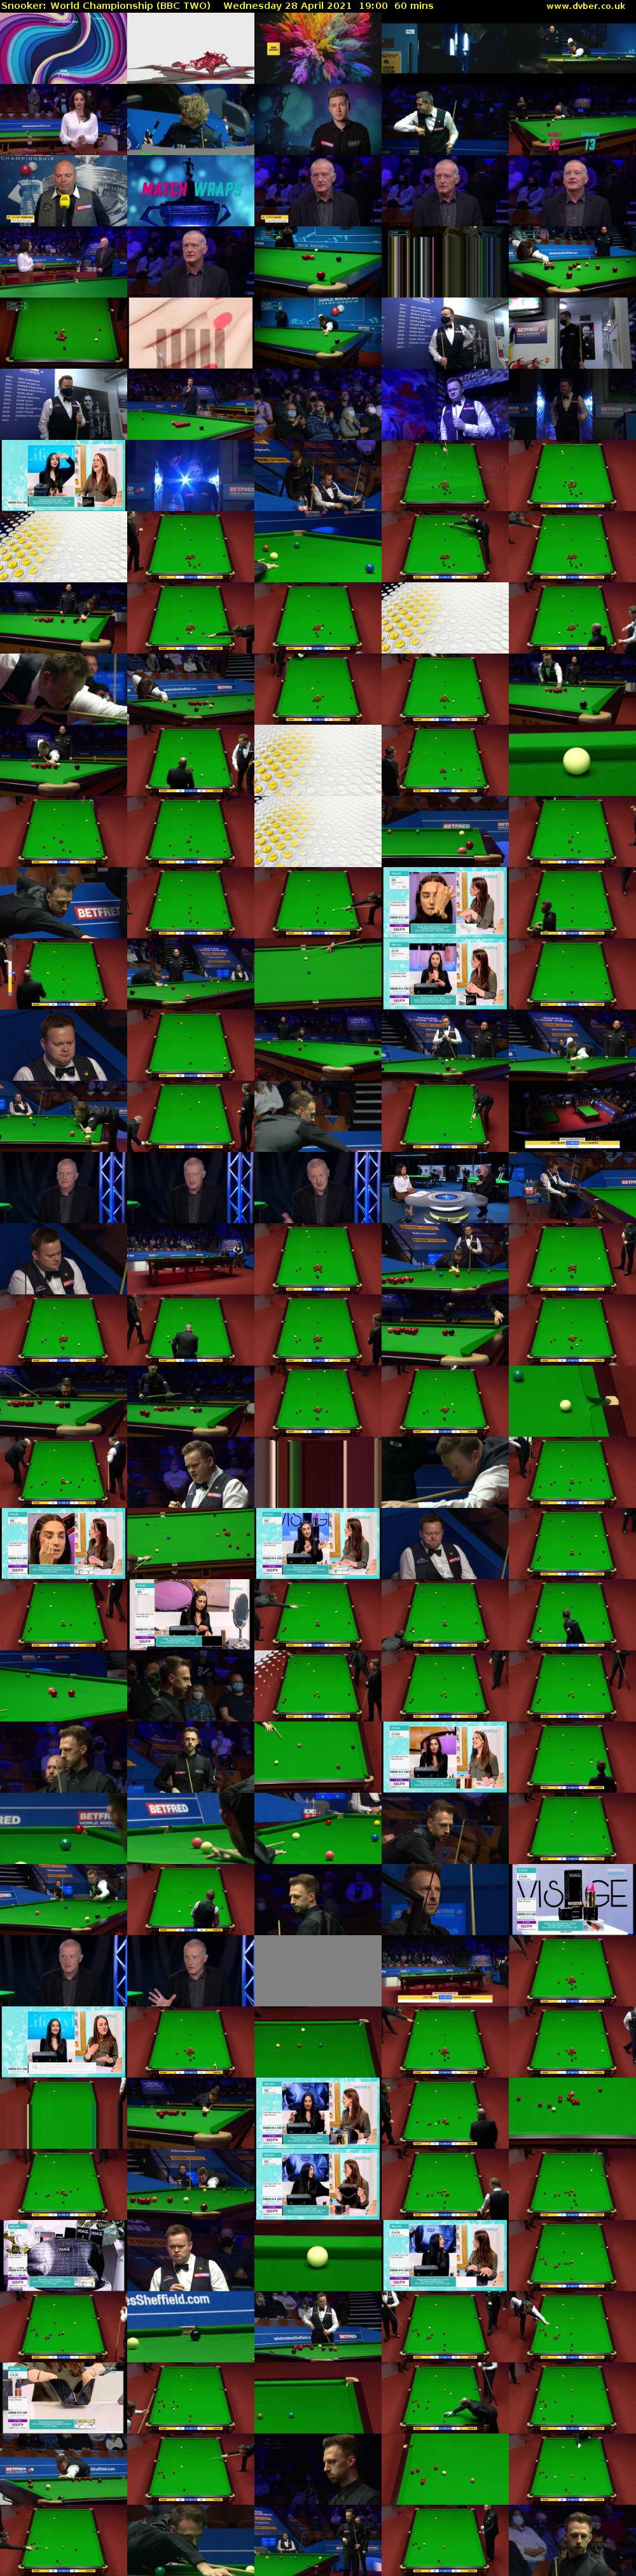 Snooker: World Championship (BBC TWO) Wednesday 28 April 2021 19:00 - 20:00